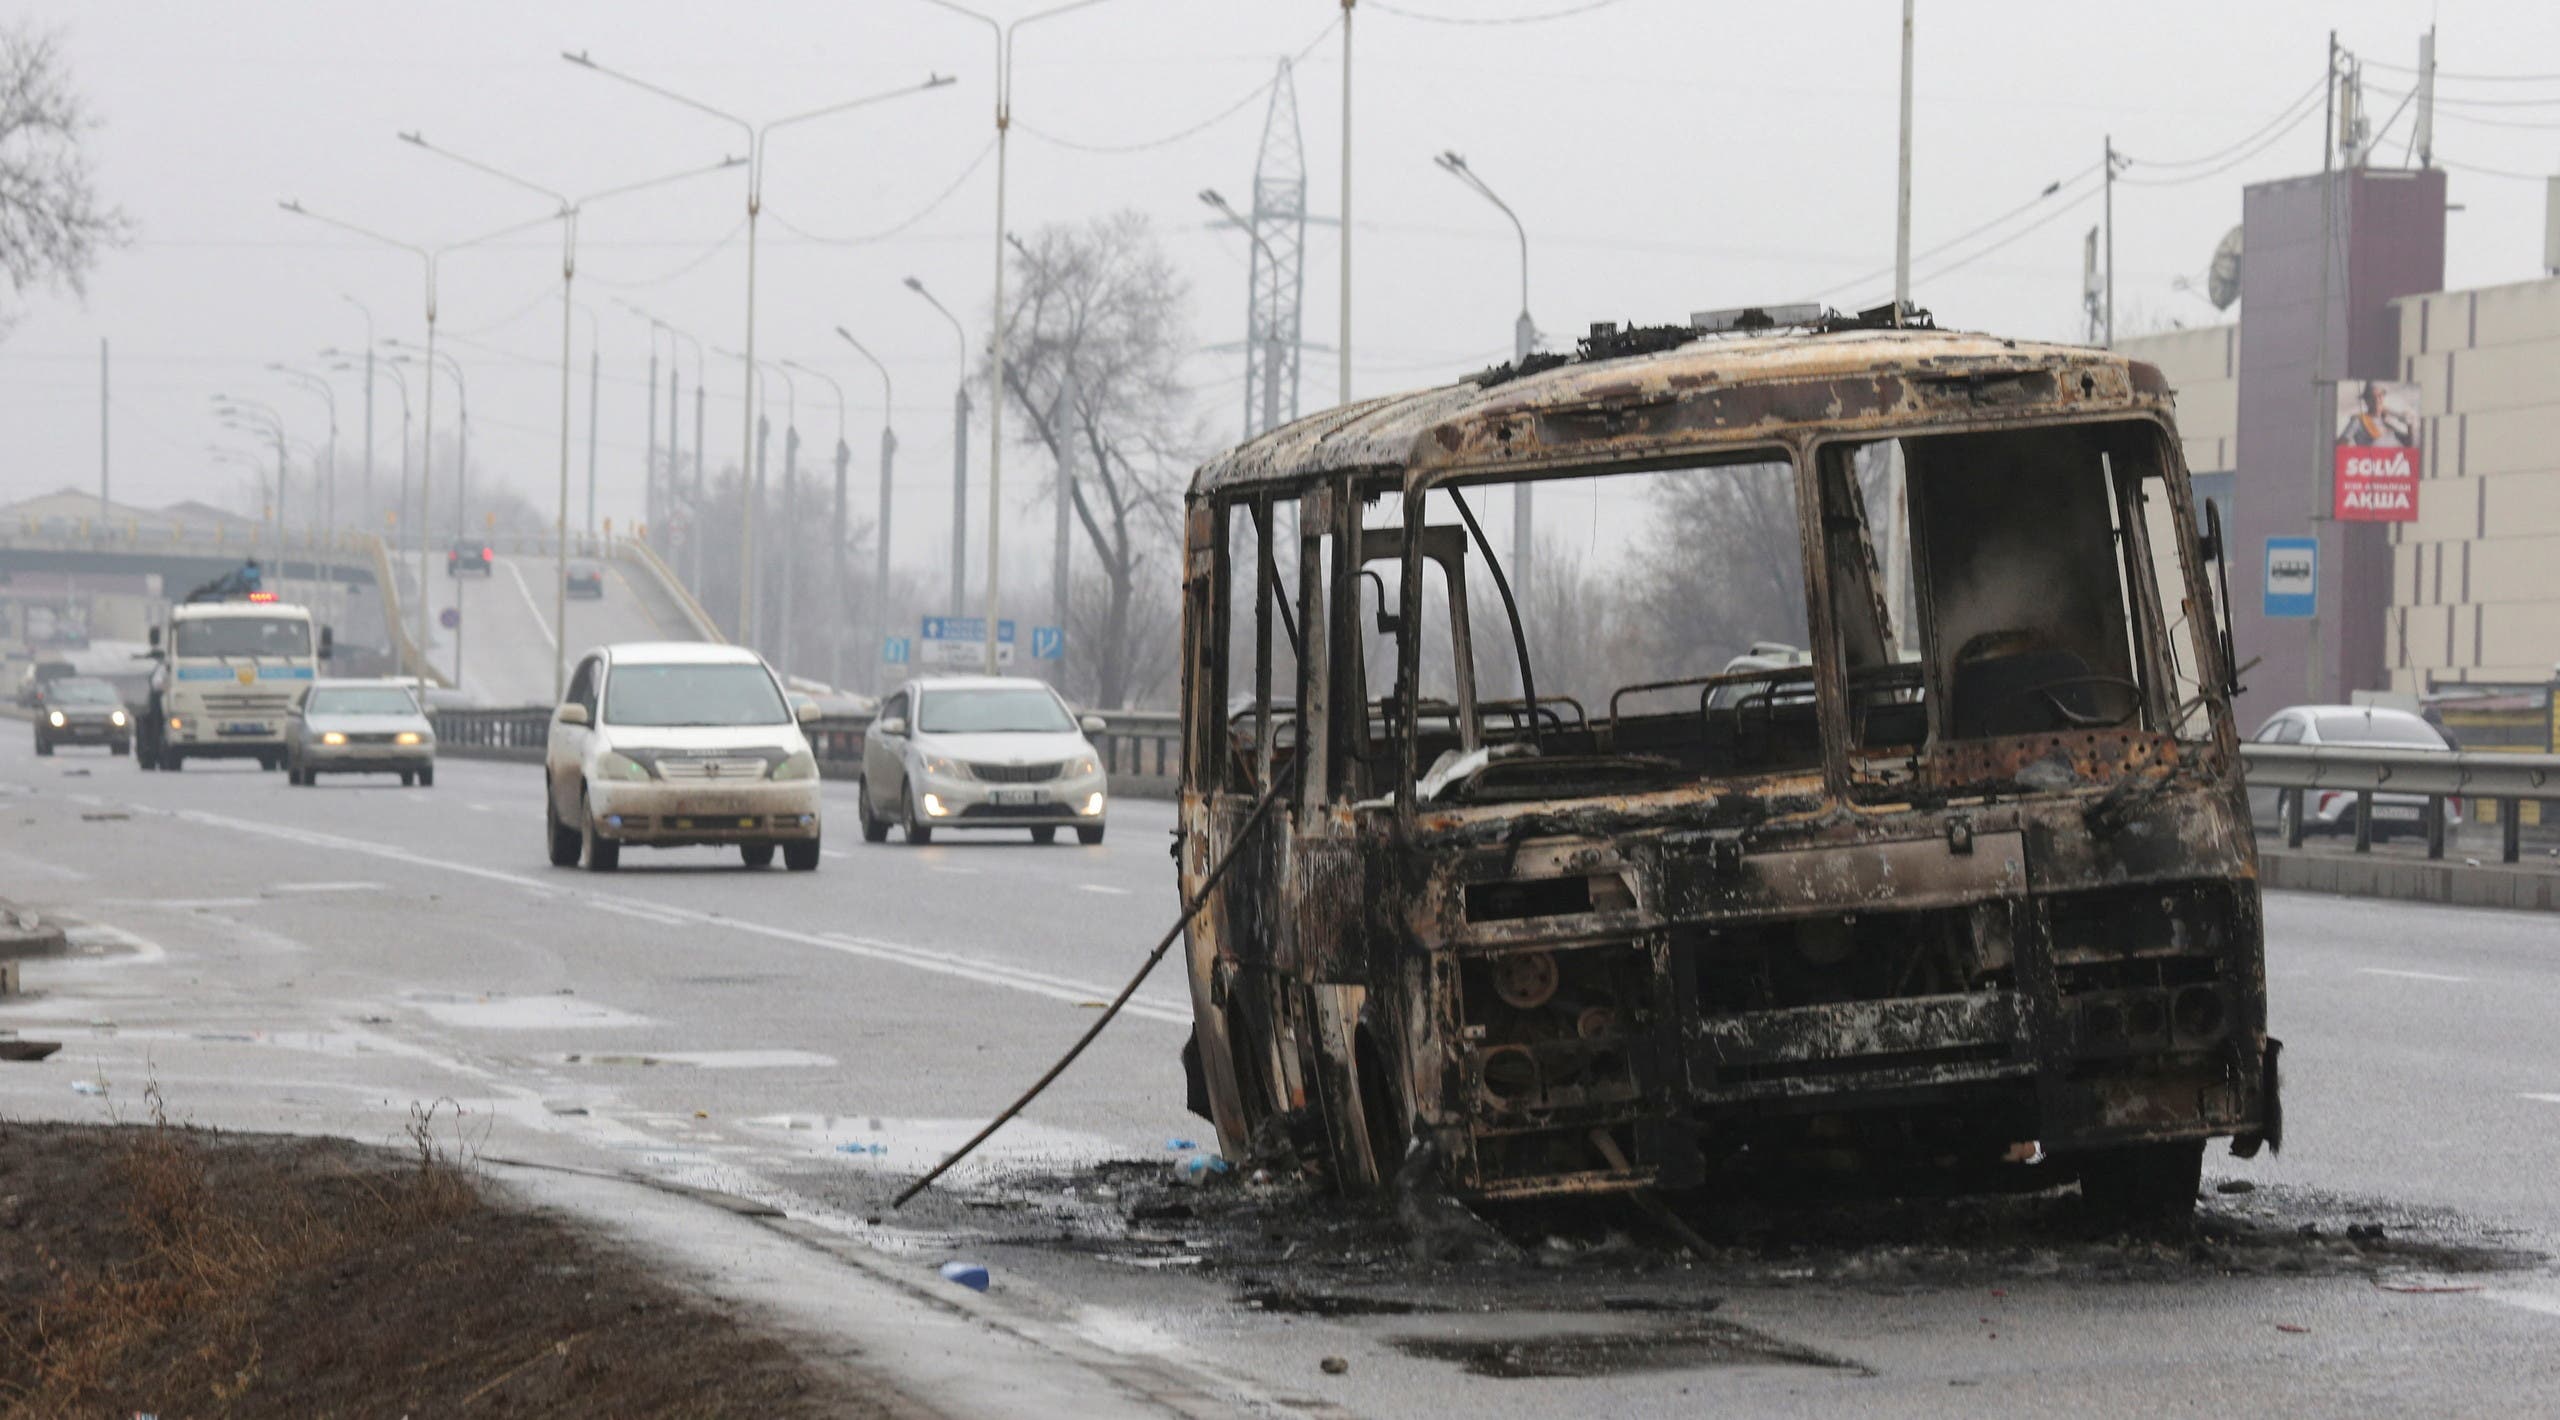 Burnt bus after protests in Almaty